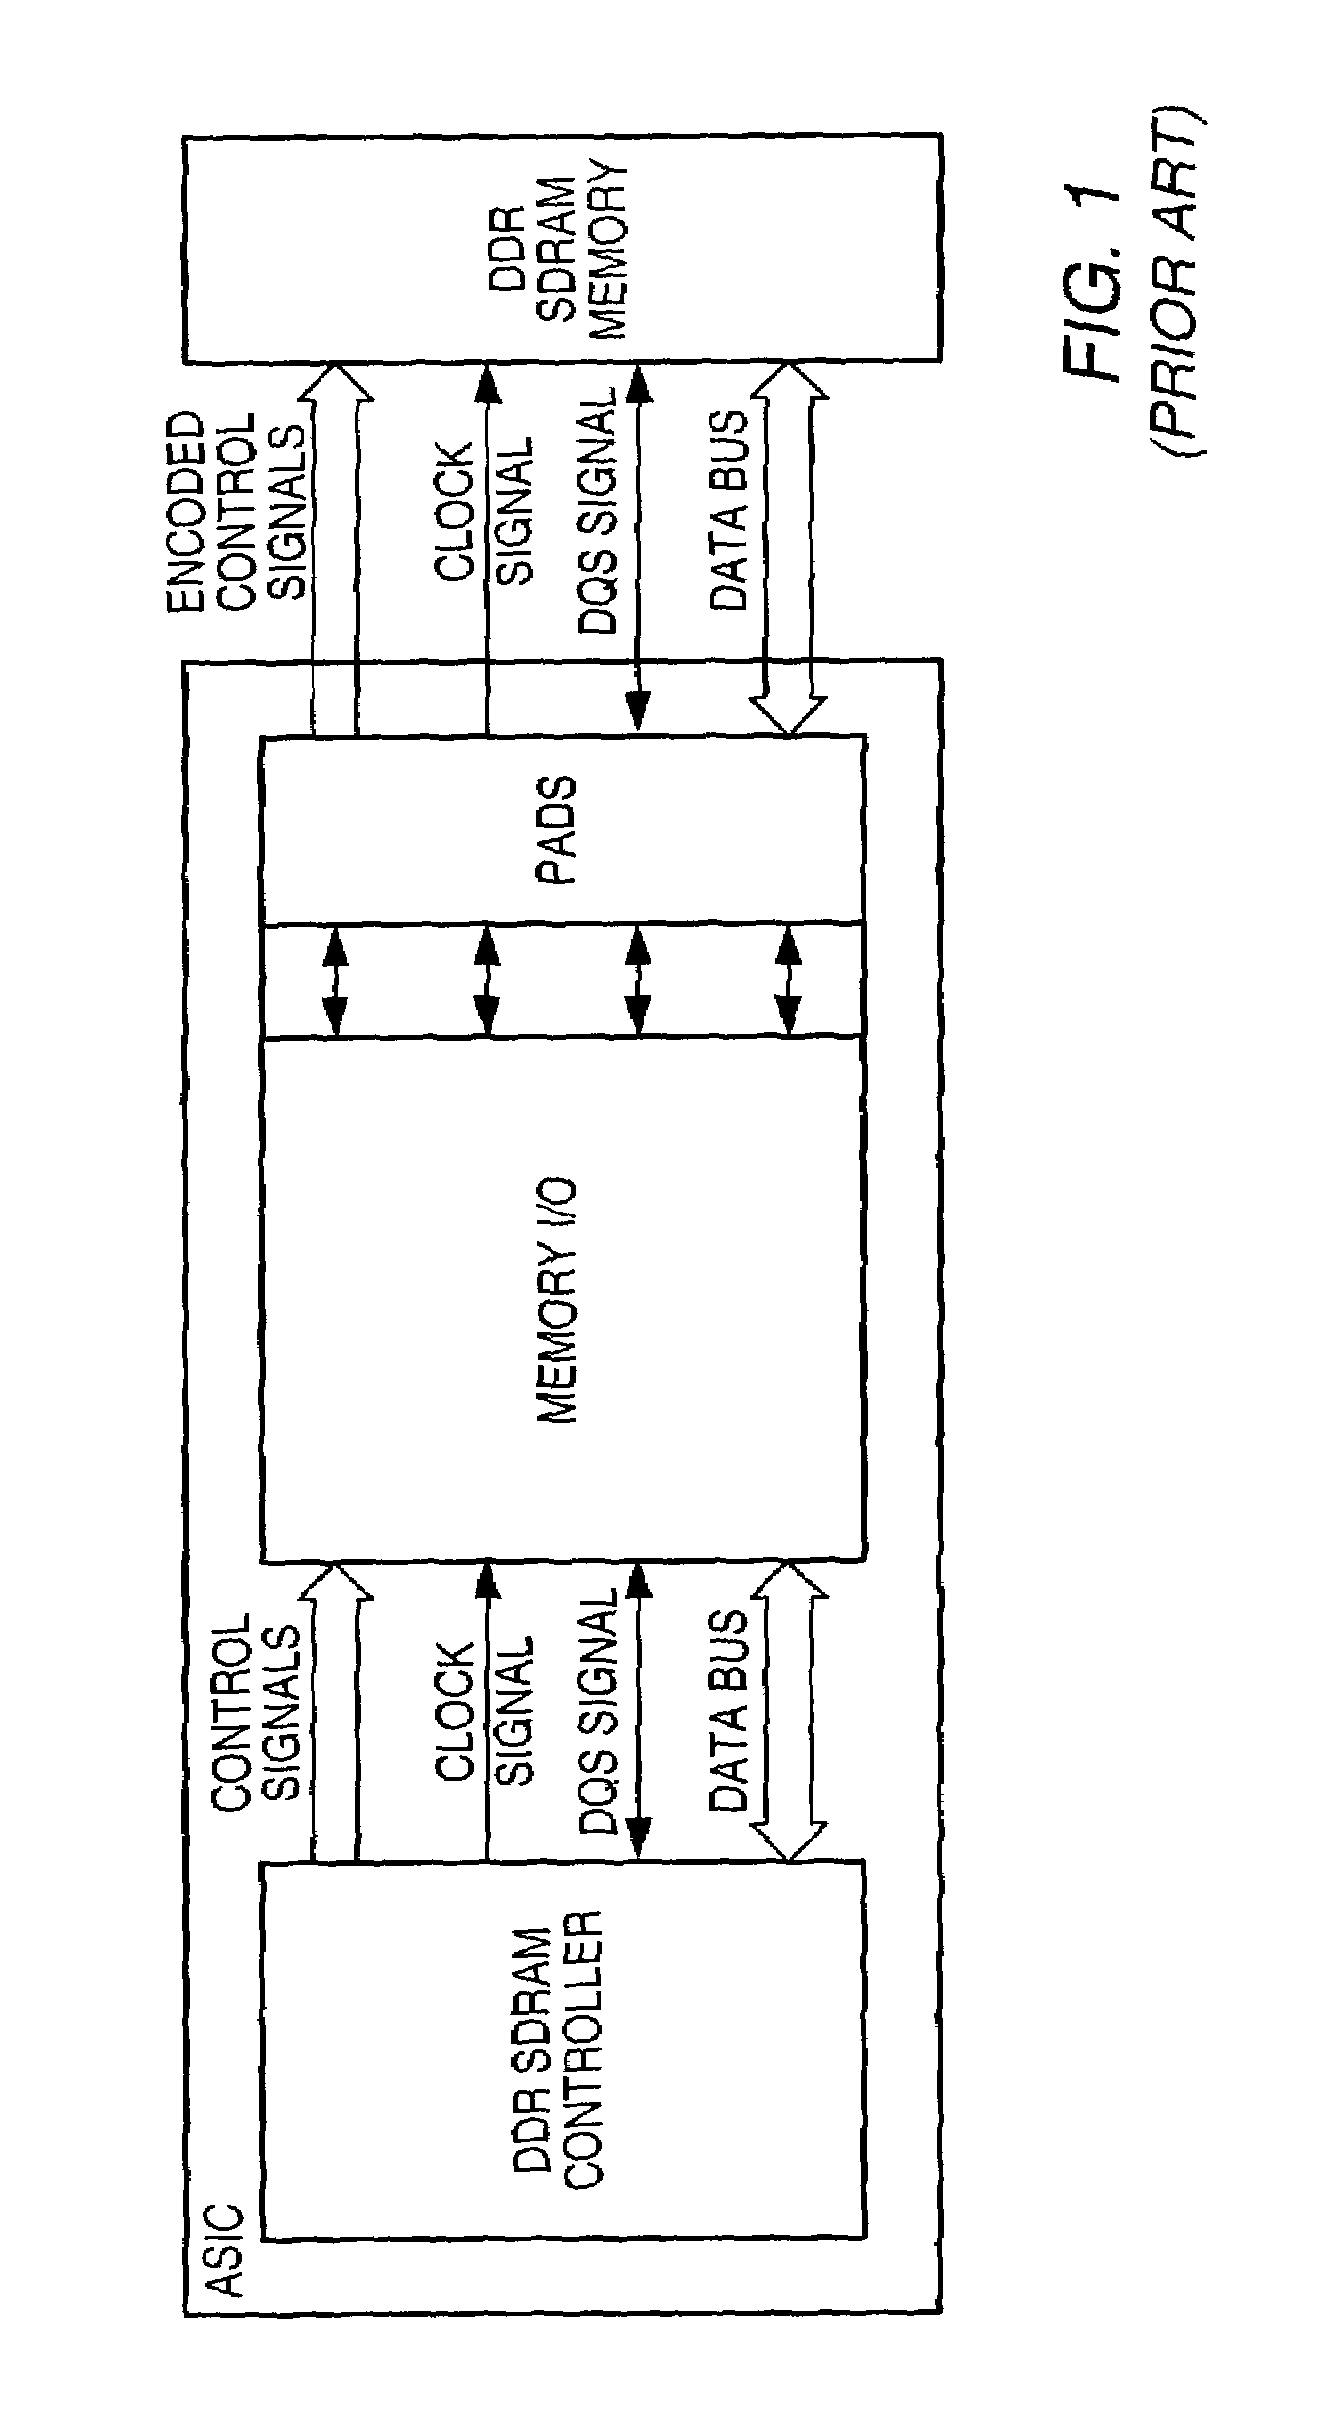 Method for optimizing utilization of a double-data-rate-SDRAM memory system